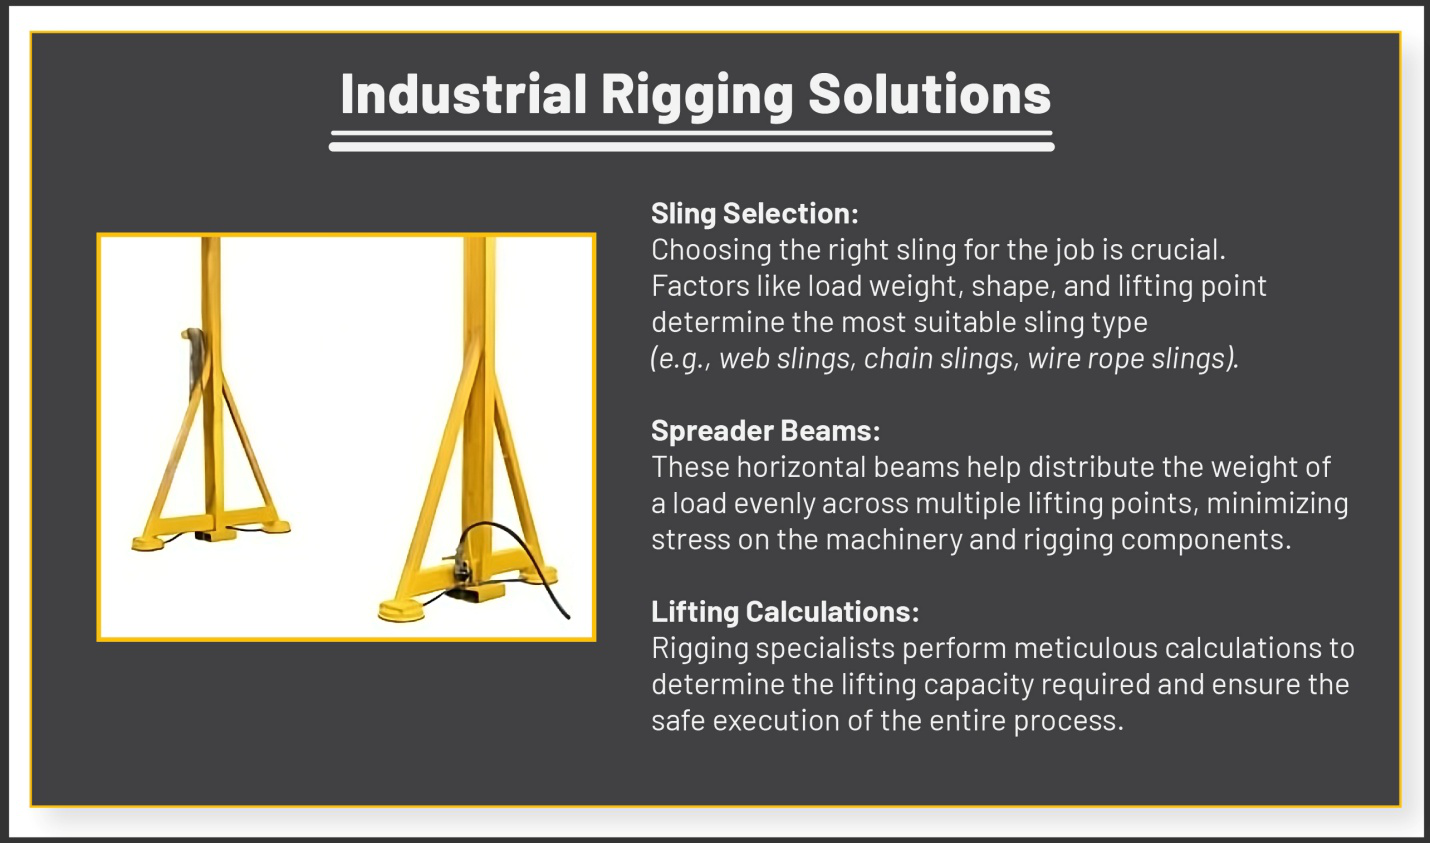 An infographic explaining industrial rigging solutions